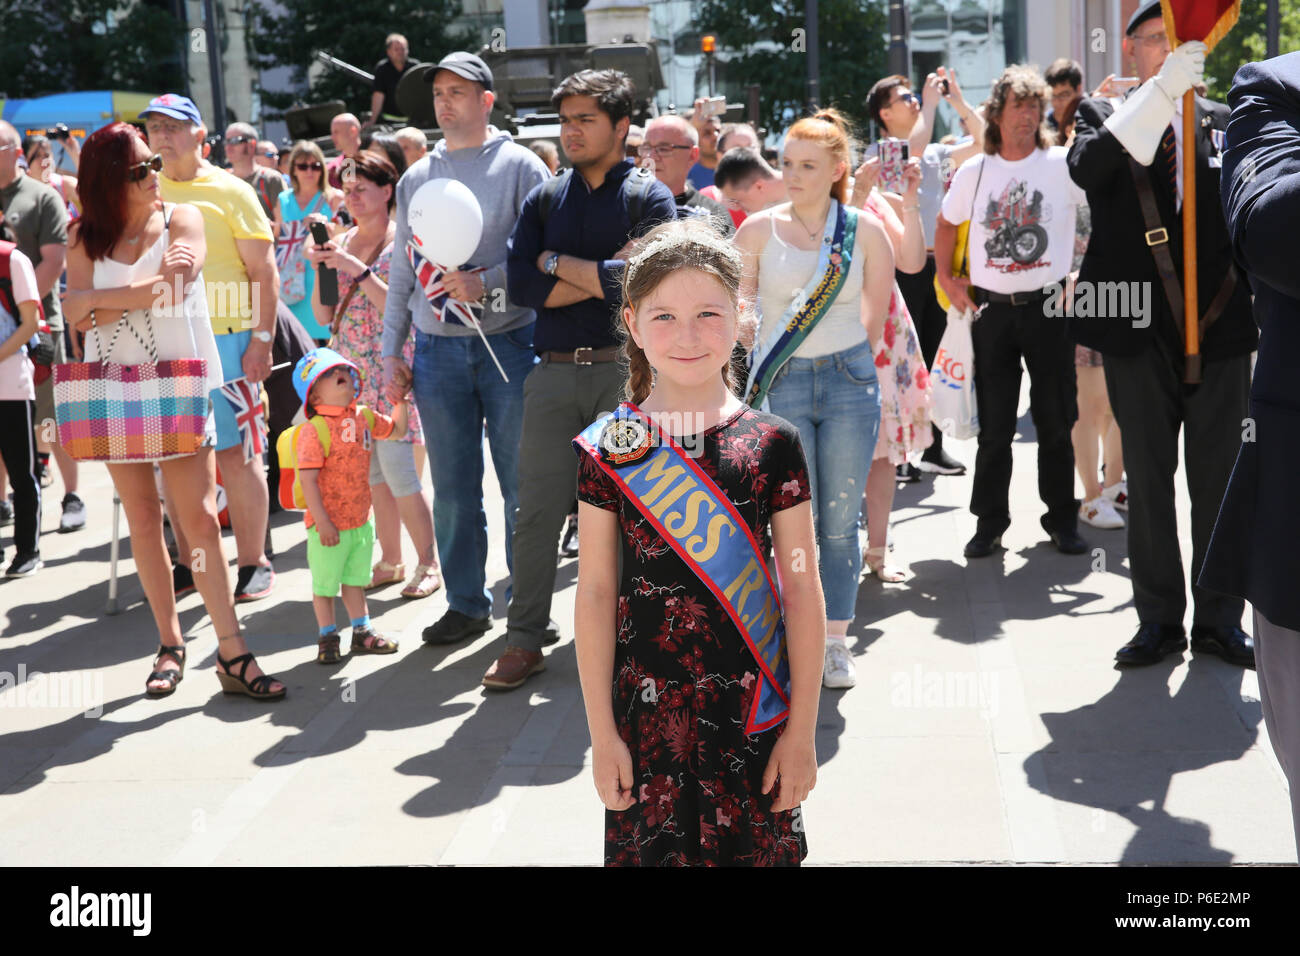 Manchester, UK, 30 June 2018. A young girl on parade during celebrations of Armed Forces Day where the public are given the opportunity to meet members of the armed forces and talk to them about the work they do, St Peters Square, Manchester, 30th June, 2018 (C)Barbara Cook/Alamy Live News Stock Photo